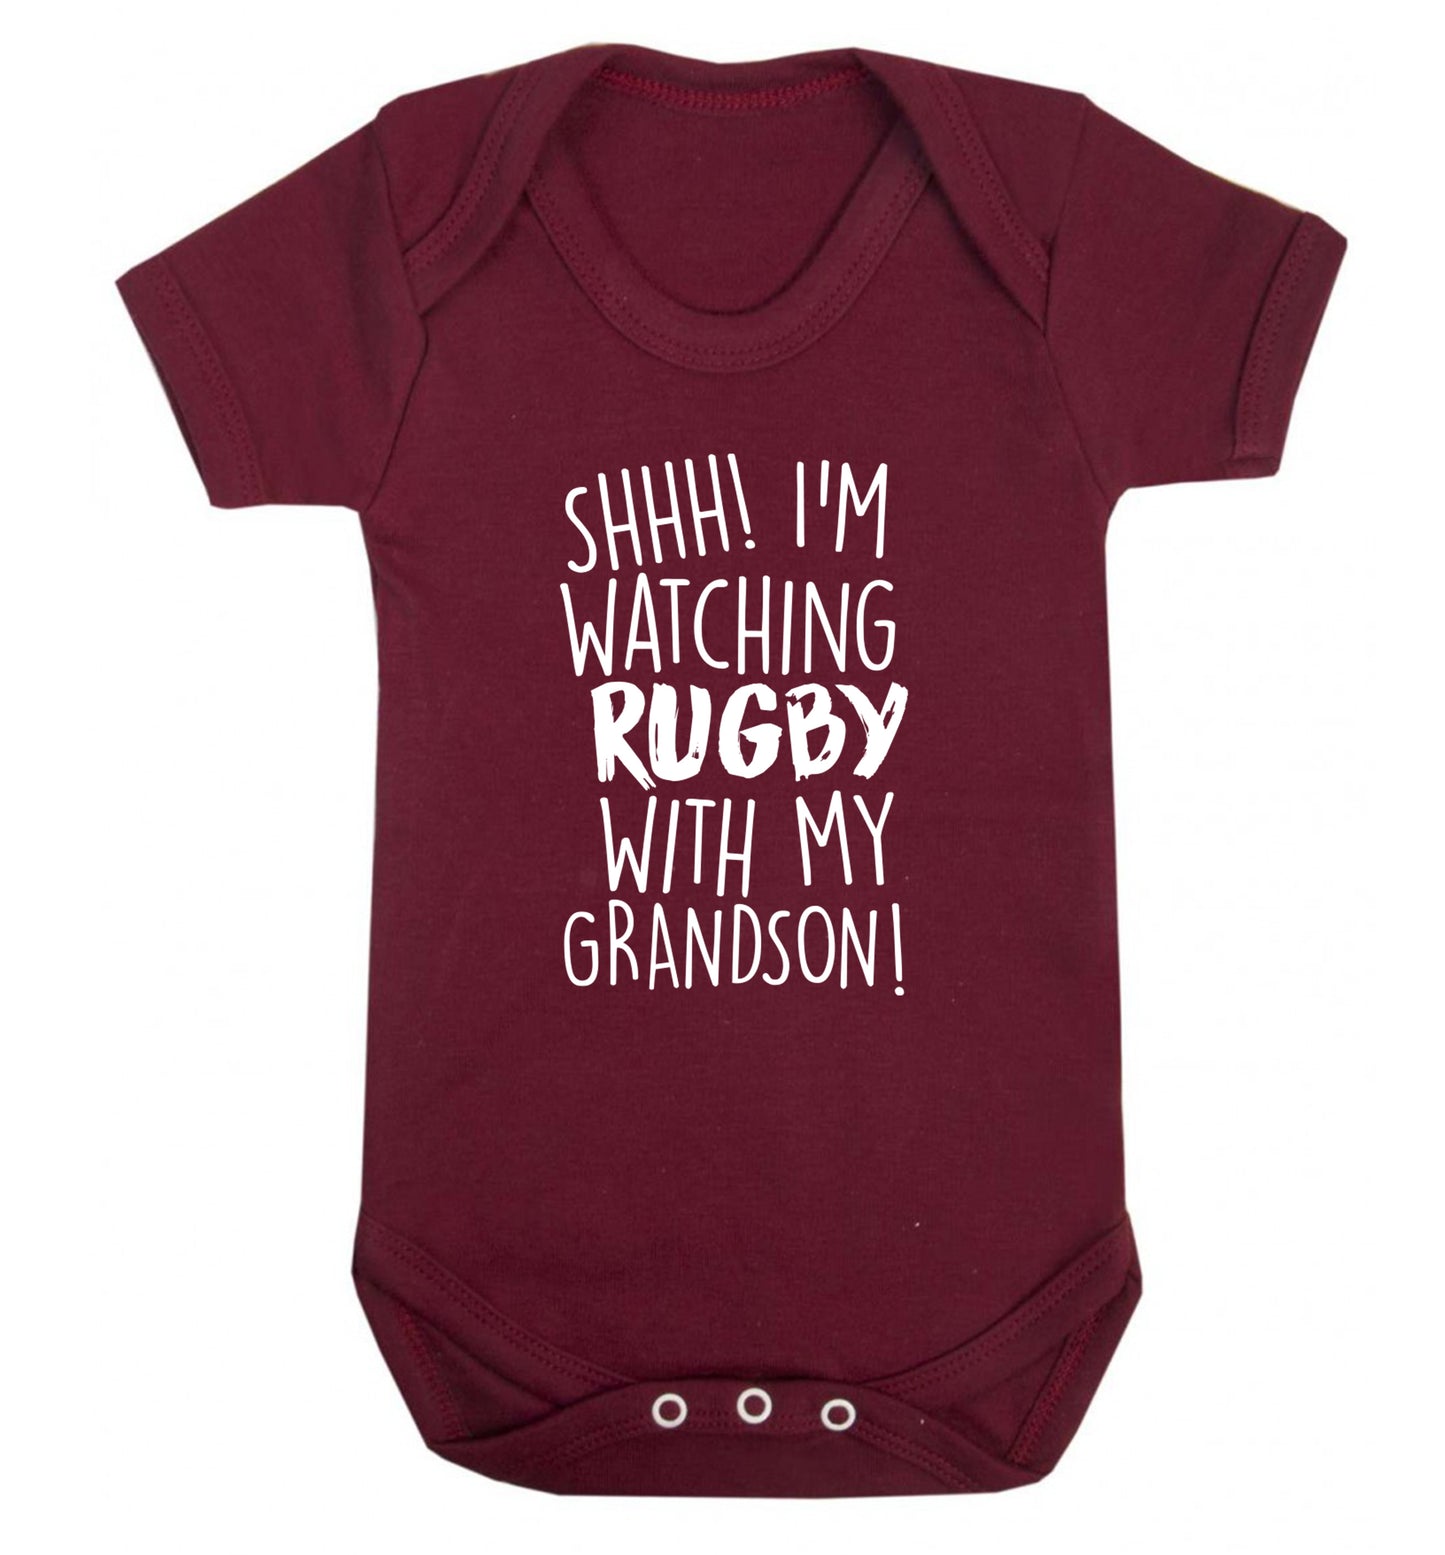 Shh I'm watching rugby with my grandson Baby Vest maroon 18-24 months